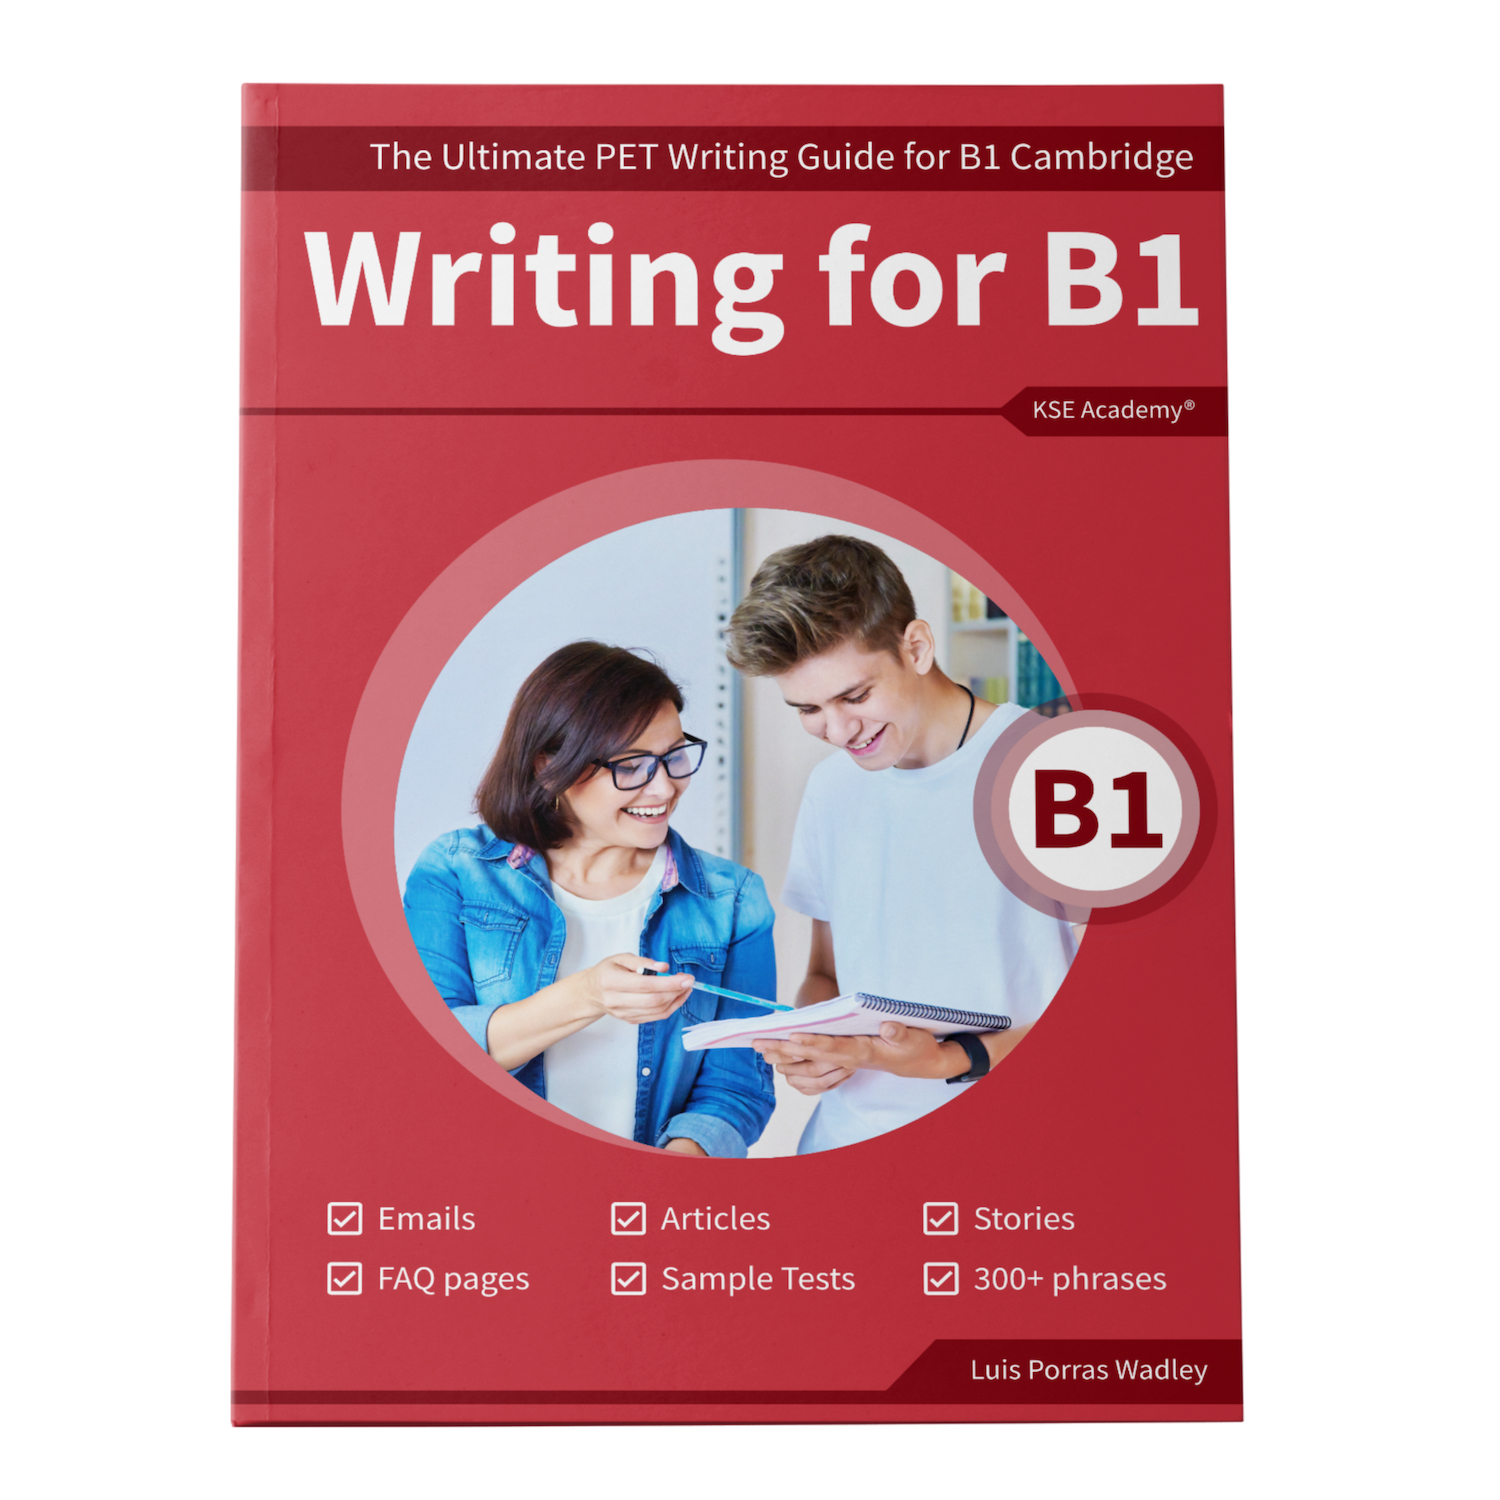 Writing B1: The Ultimate PET Writing Guide for B1 Preliminary